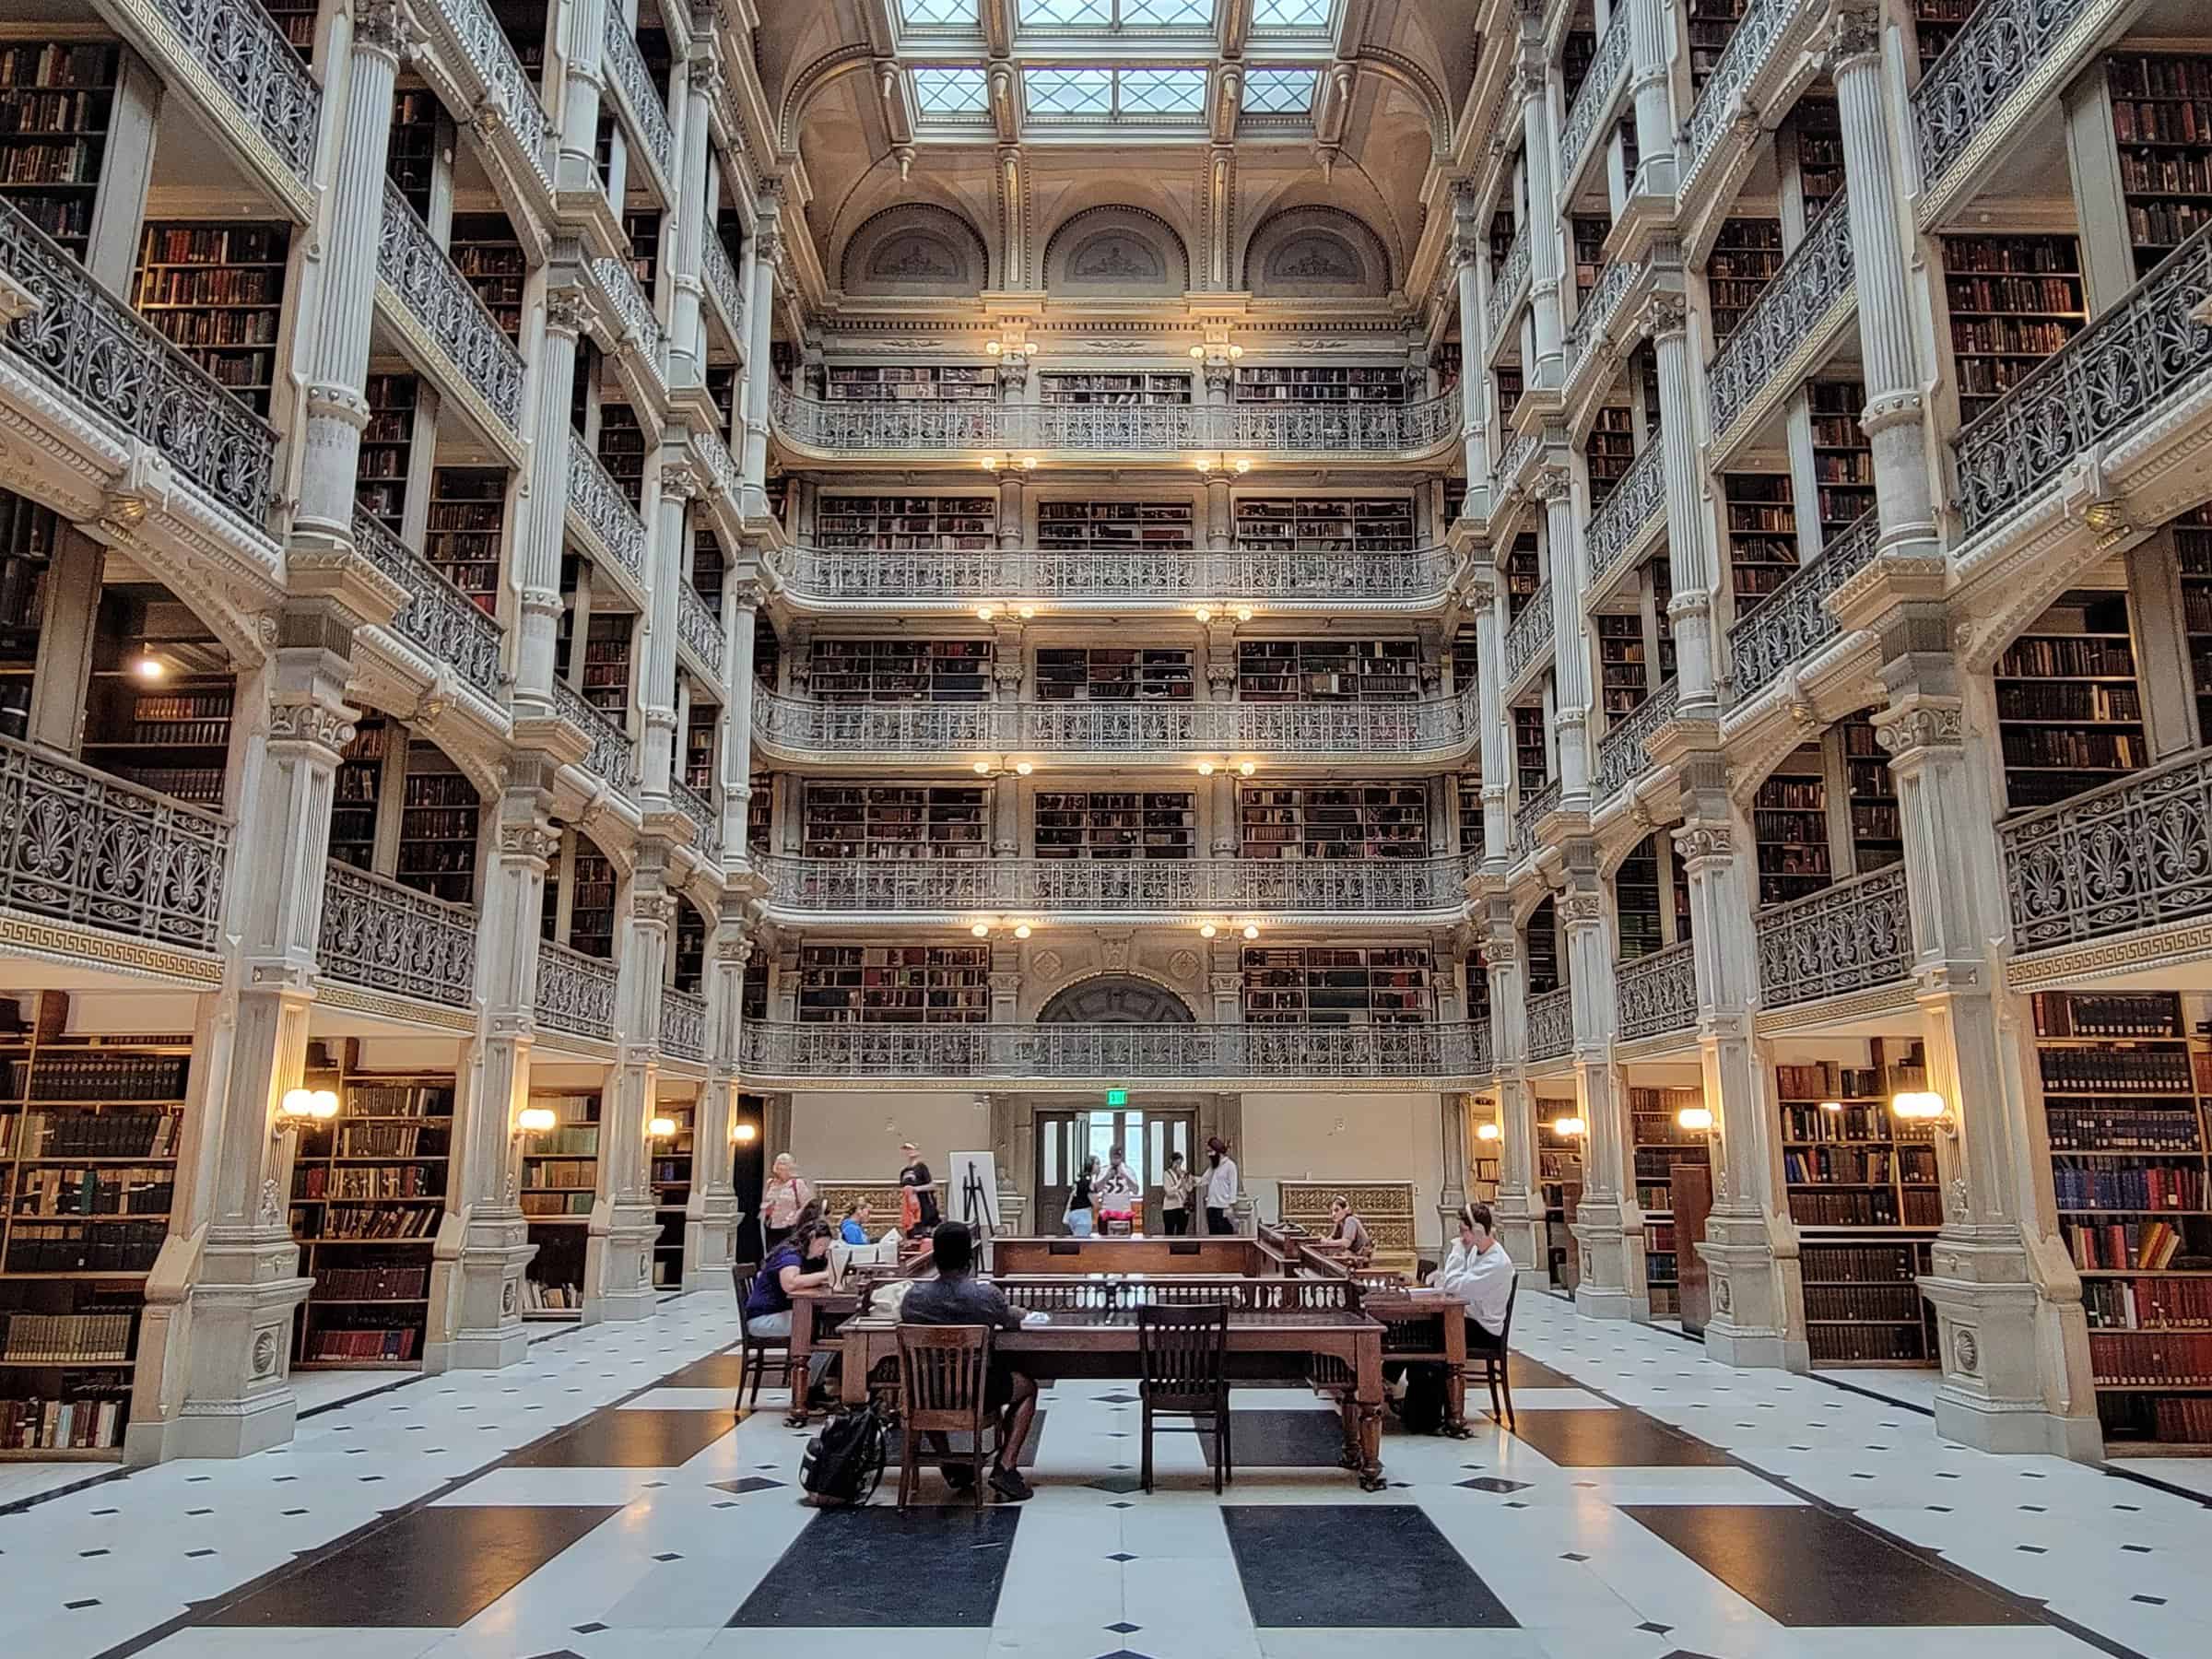 Interior of the George Peabody Library in Baltimore, showcasing its grand five-tiered, cast-iron balconies filled with books, ornate railings, and patrons enjoying the reading space